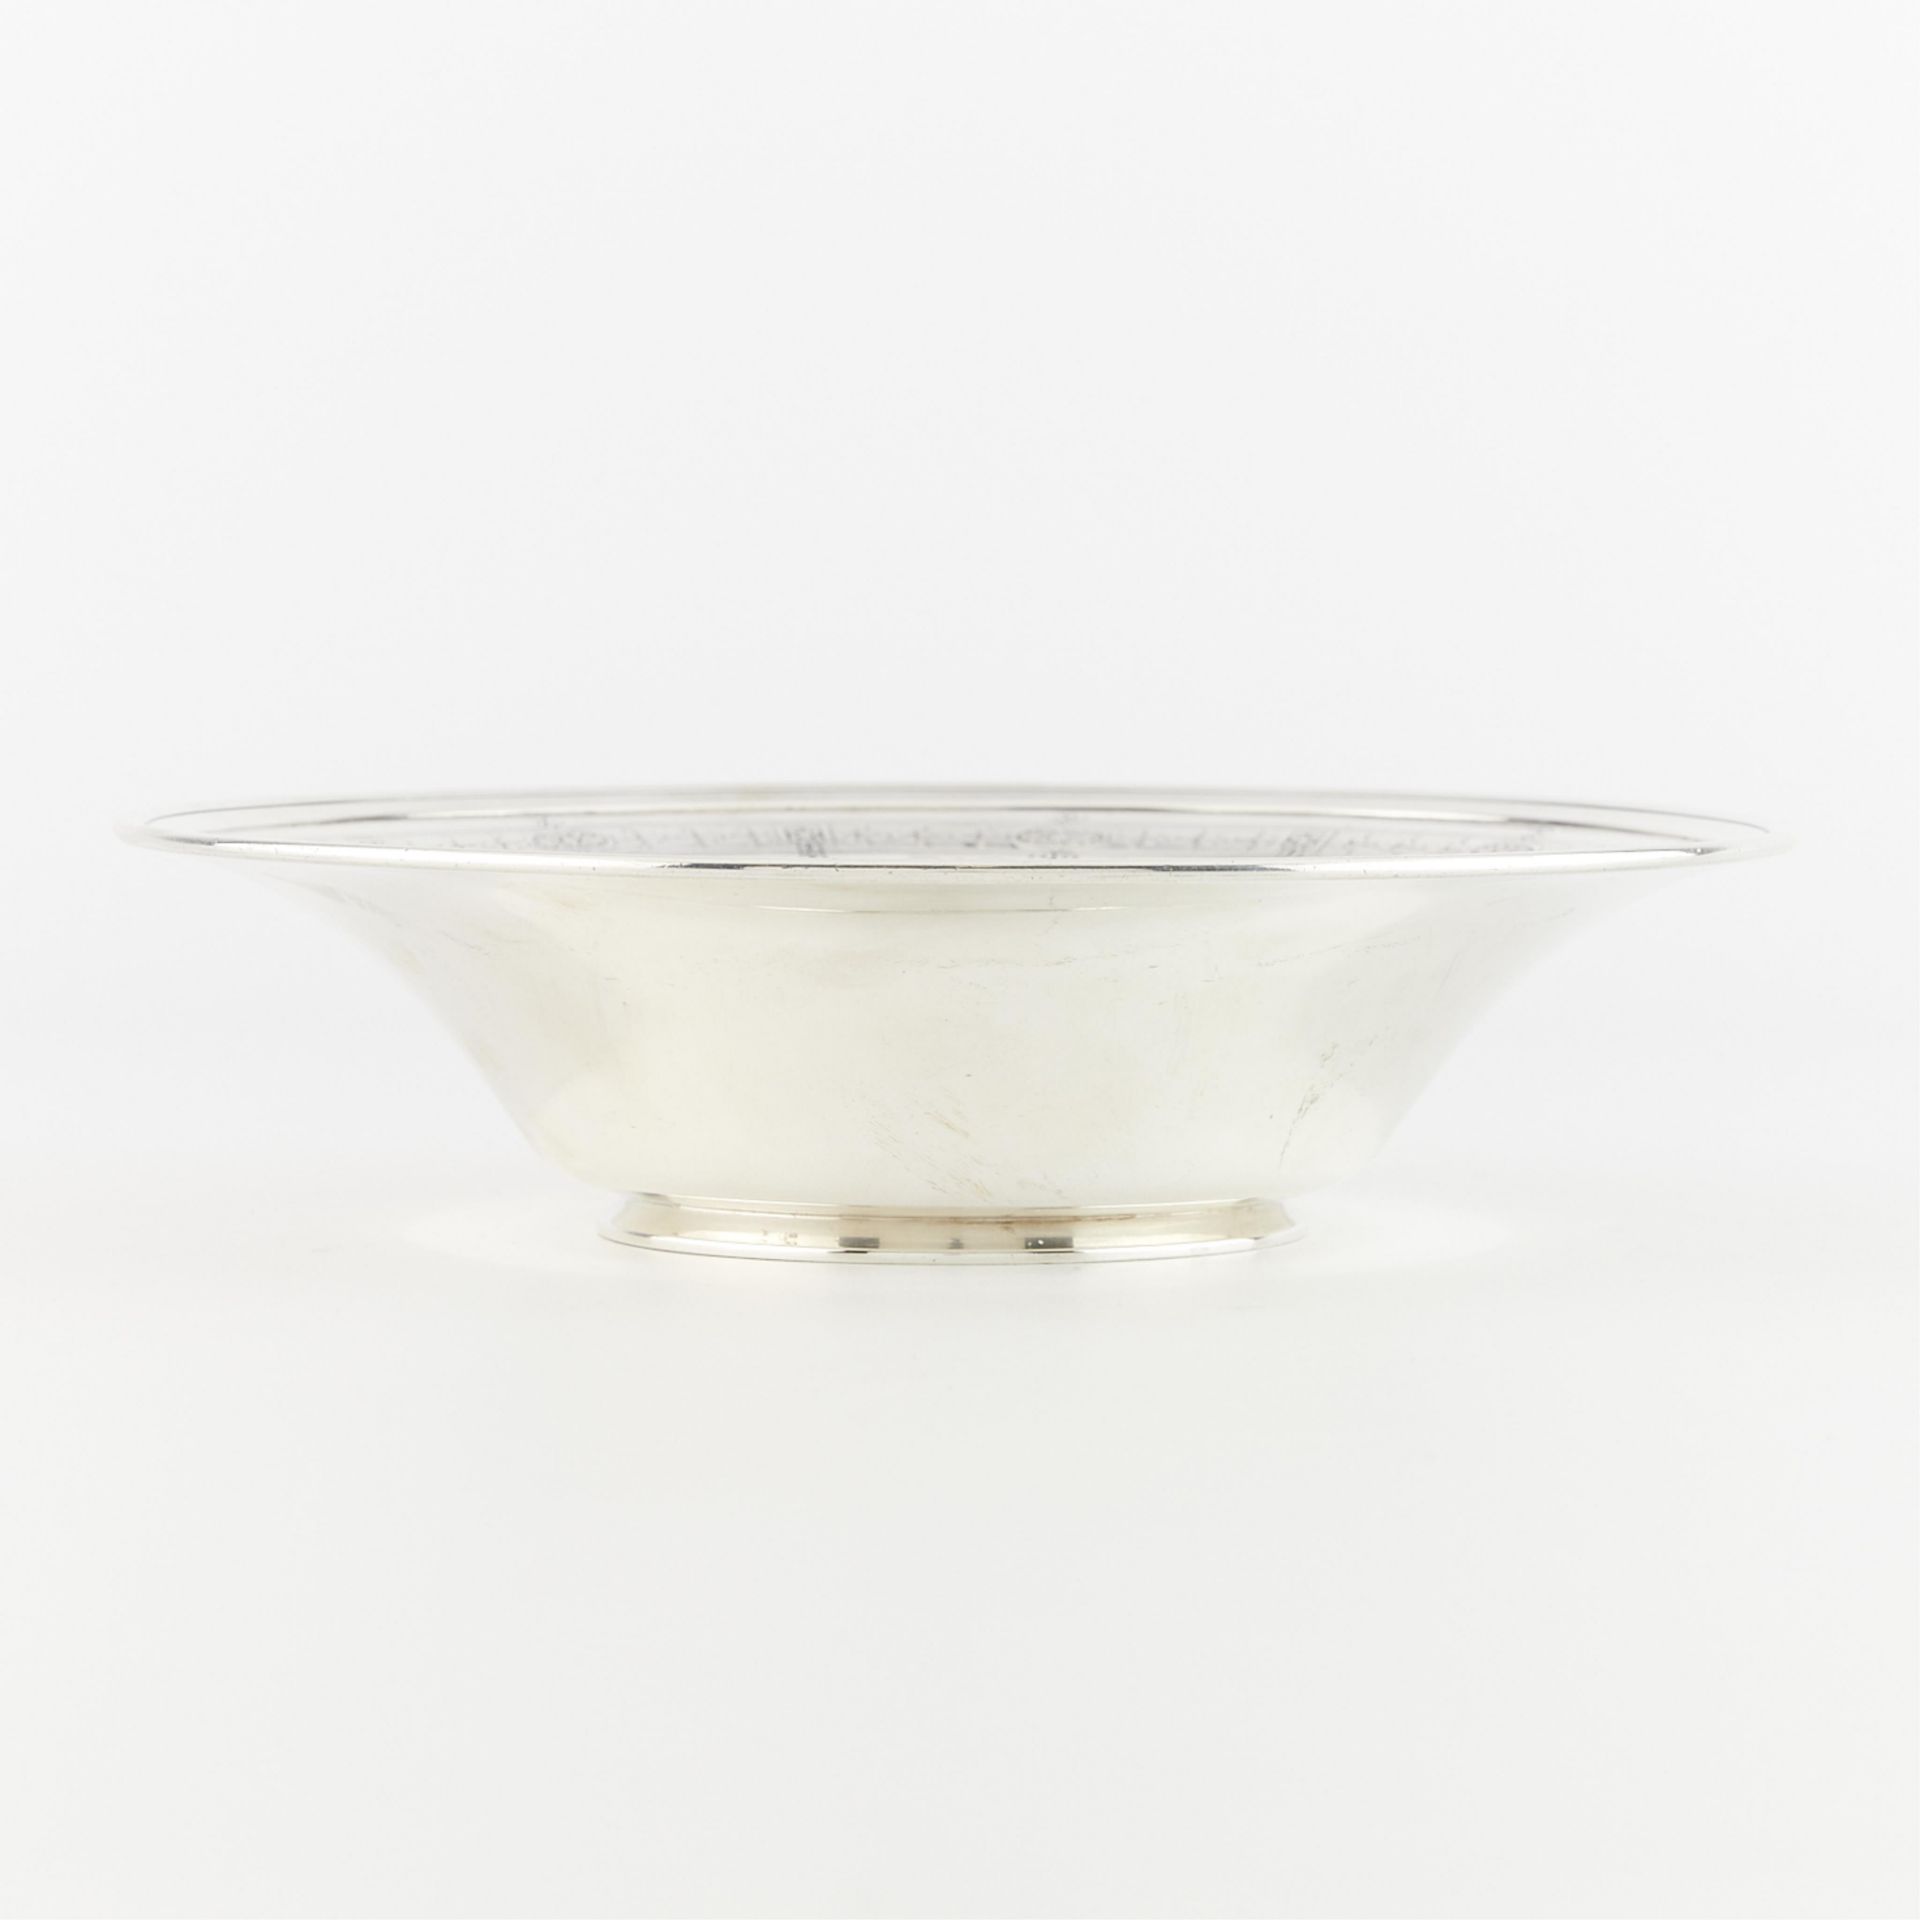 Tiffany & Co. Sterling Silver Bowl 12.1 ozt - Image 5 of 7